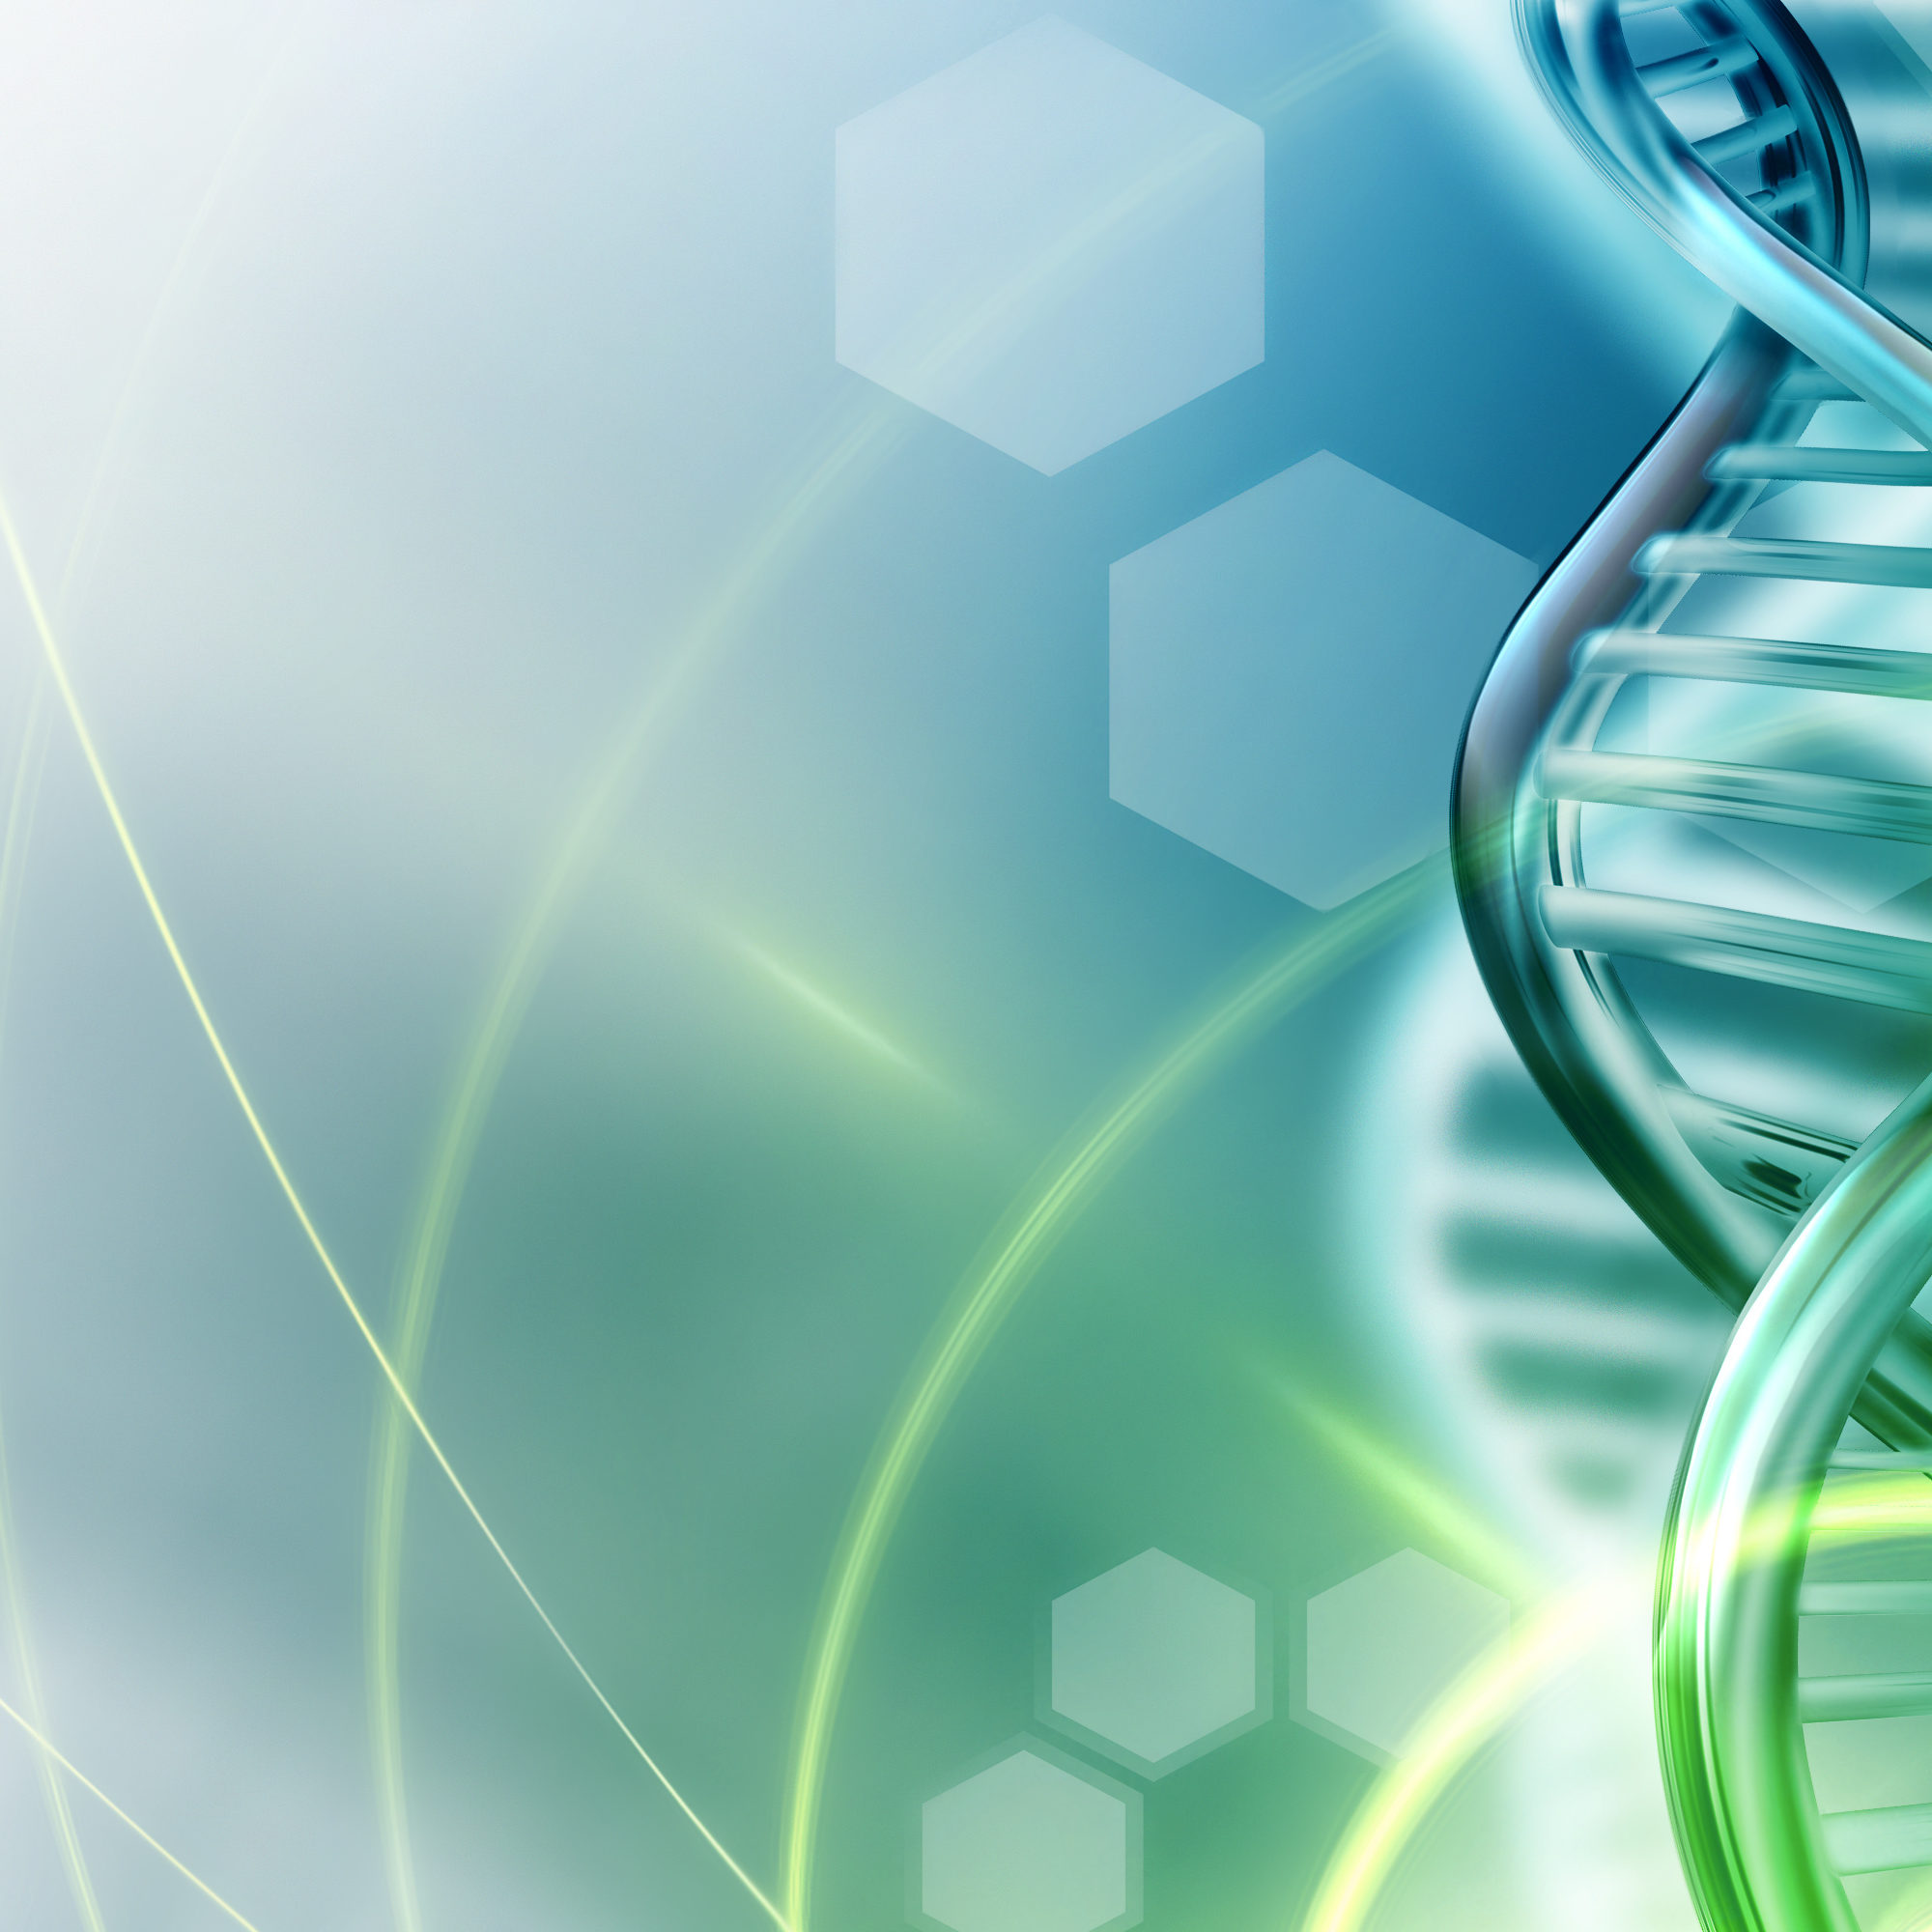 Abstract science background with DNA strands